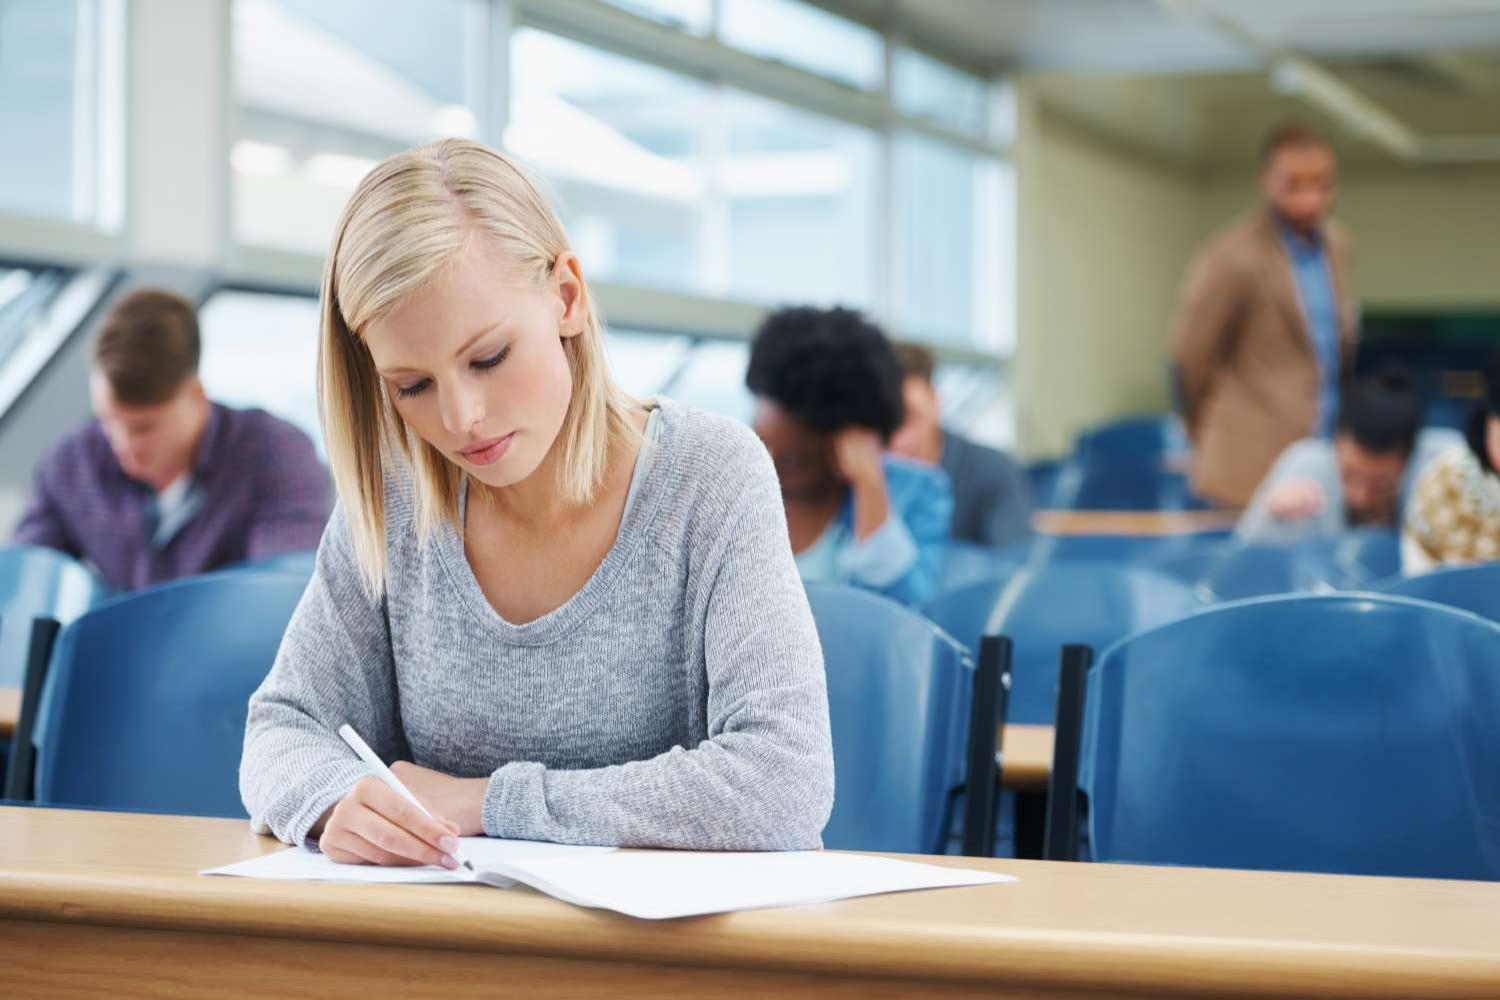 Young woman taking a test in classroom